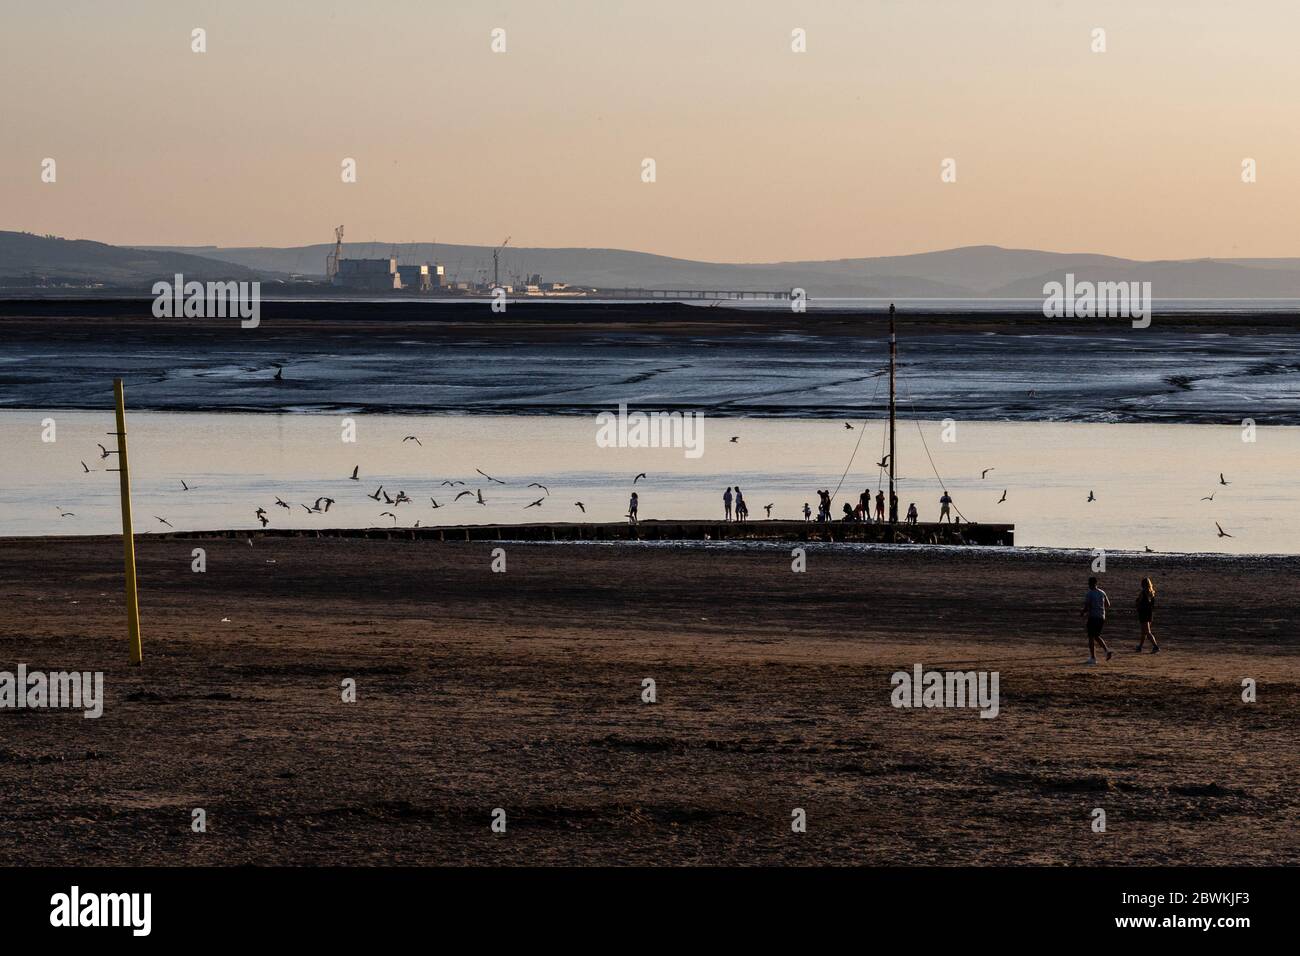 Burnham-on-Sea, England, UK - May 31, 2020: People fish, walk, jog and play on the beach and mud flats at the mouth of the River Parrett in Burnham-on Stock Photo